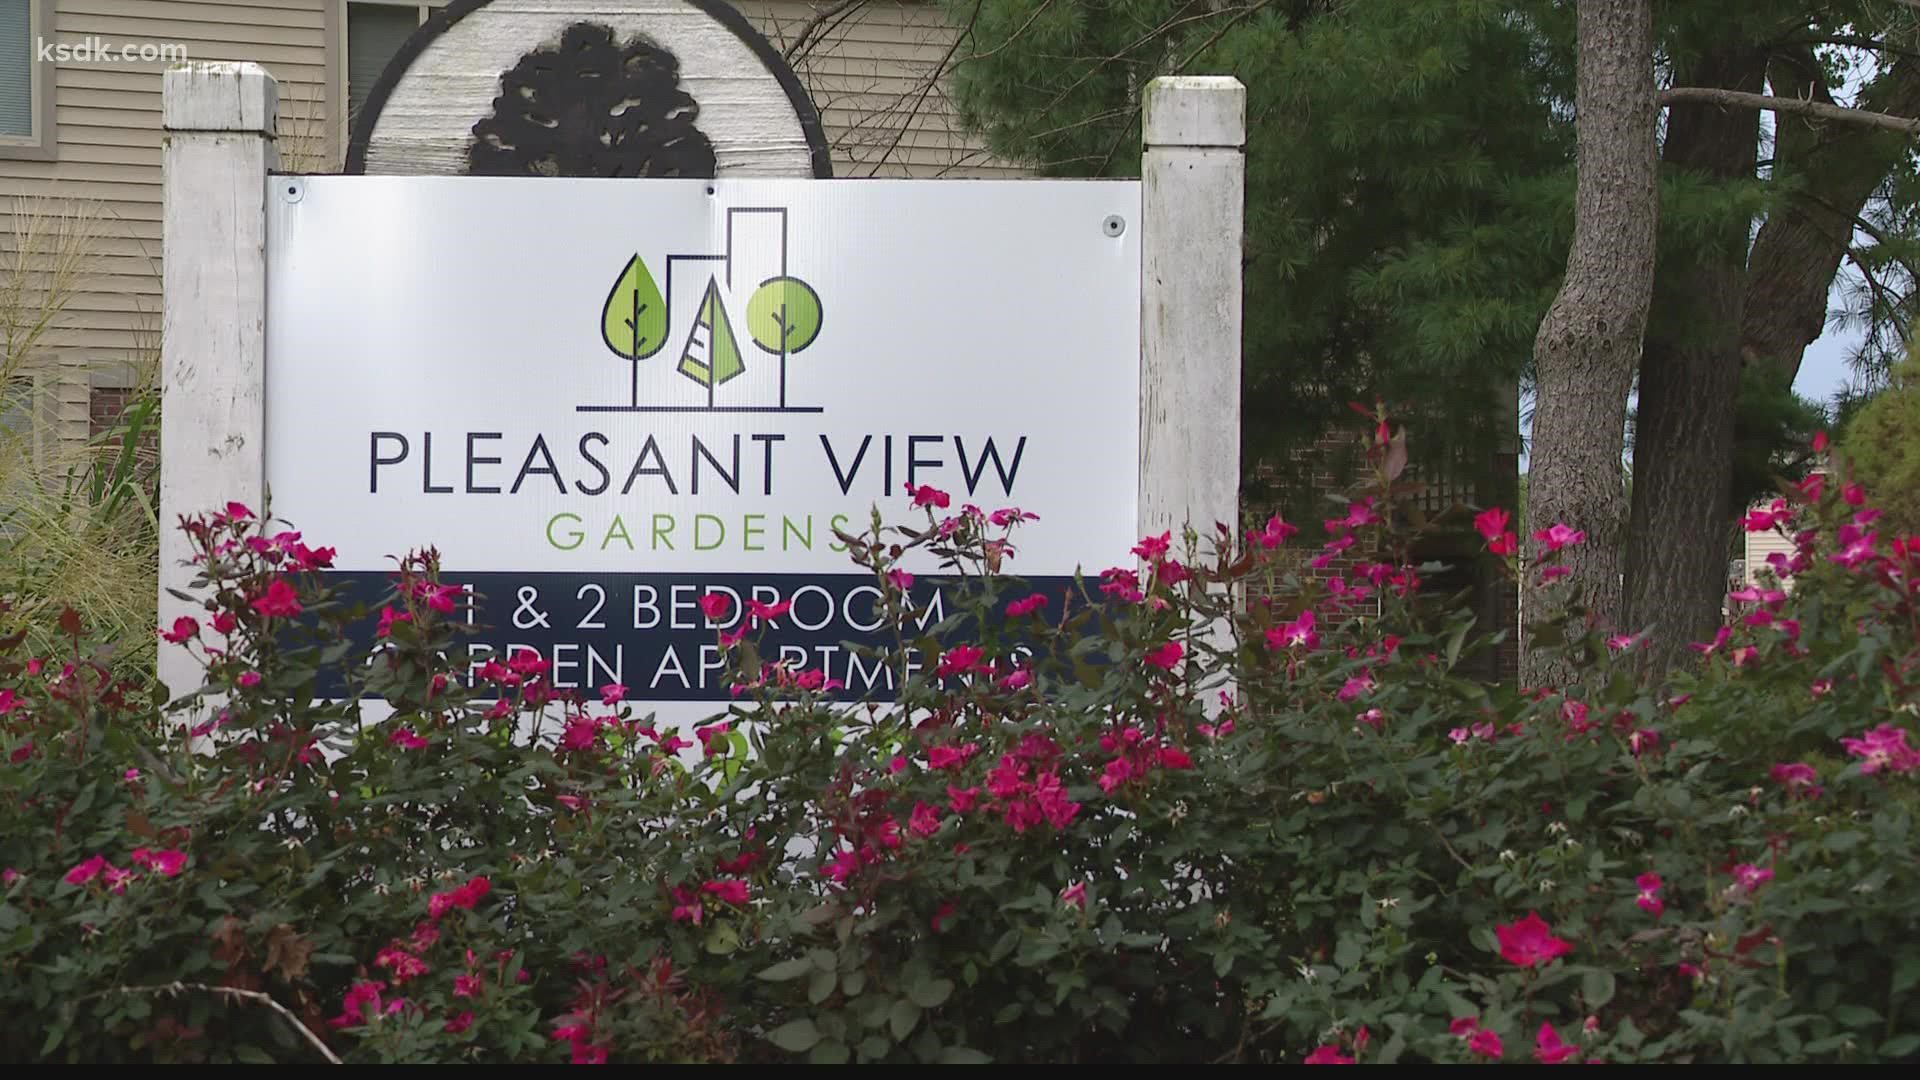 Dozens of tenants at a north St. Louis County apartment complex are furious after they say they wrongly received eviction notices.